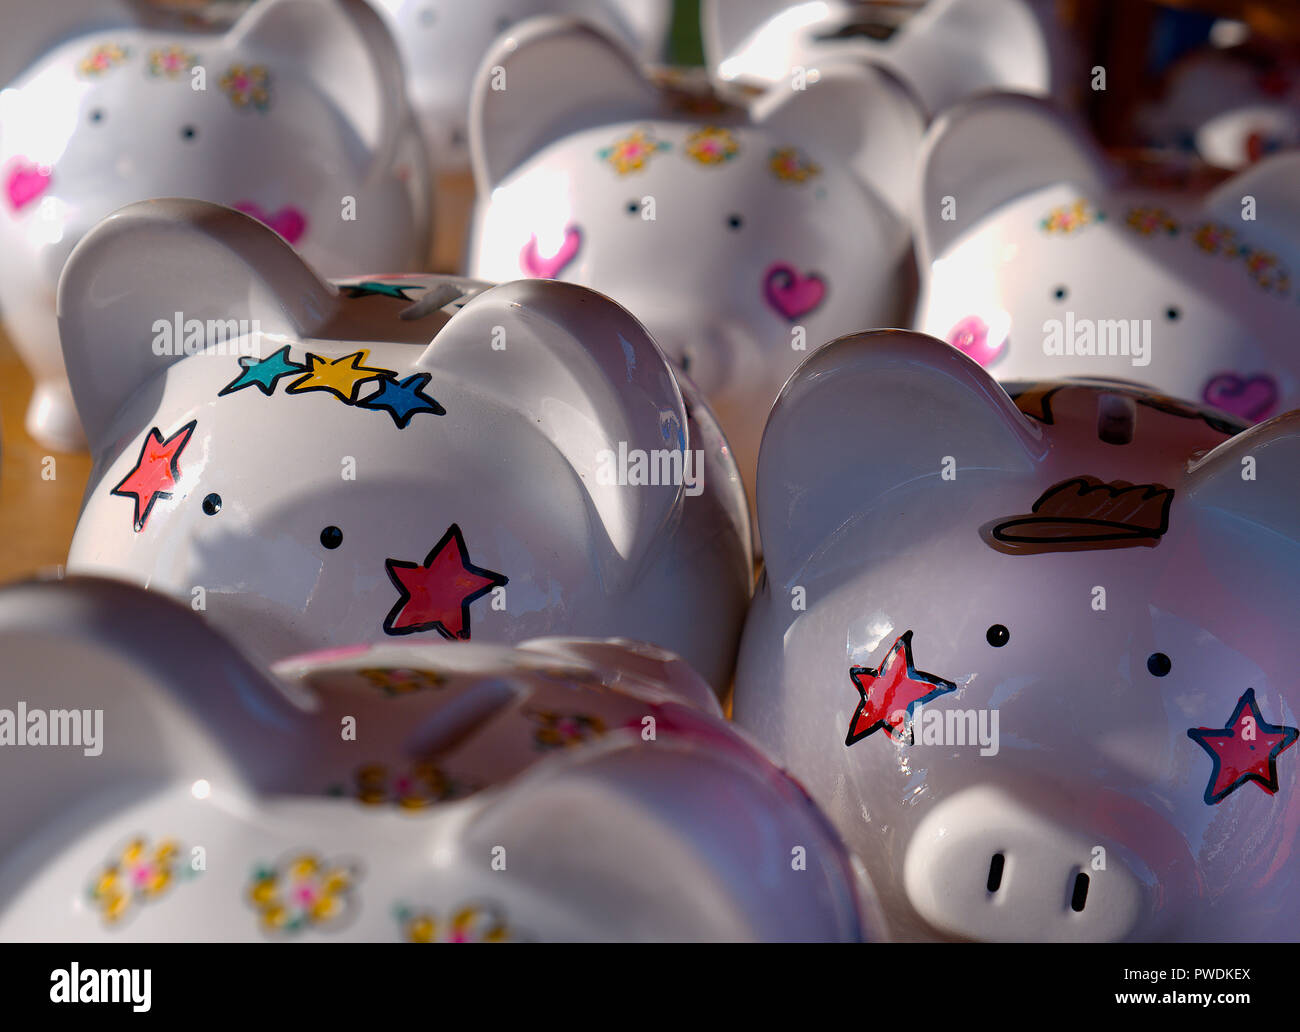 multiple decorated piggy banks in tight formation Stock Photo